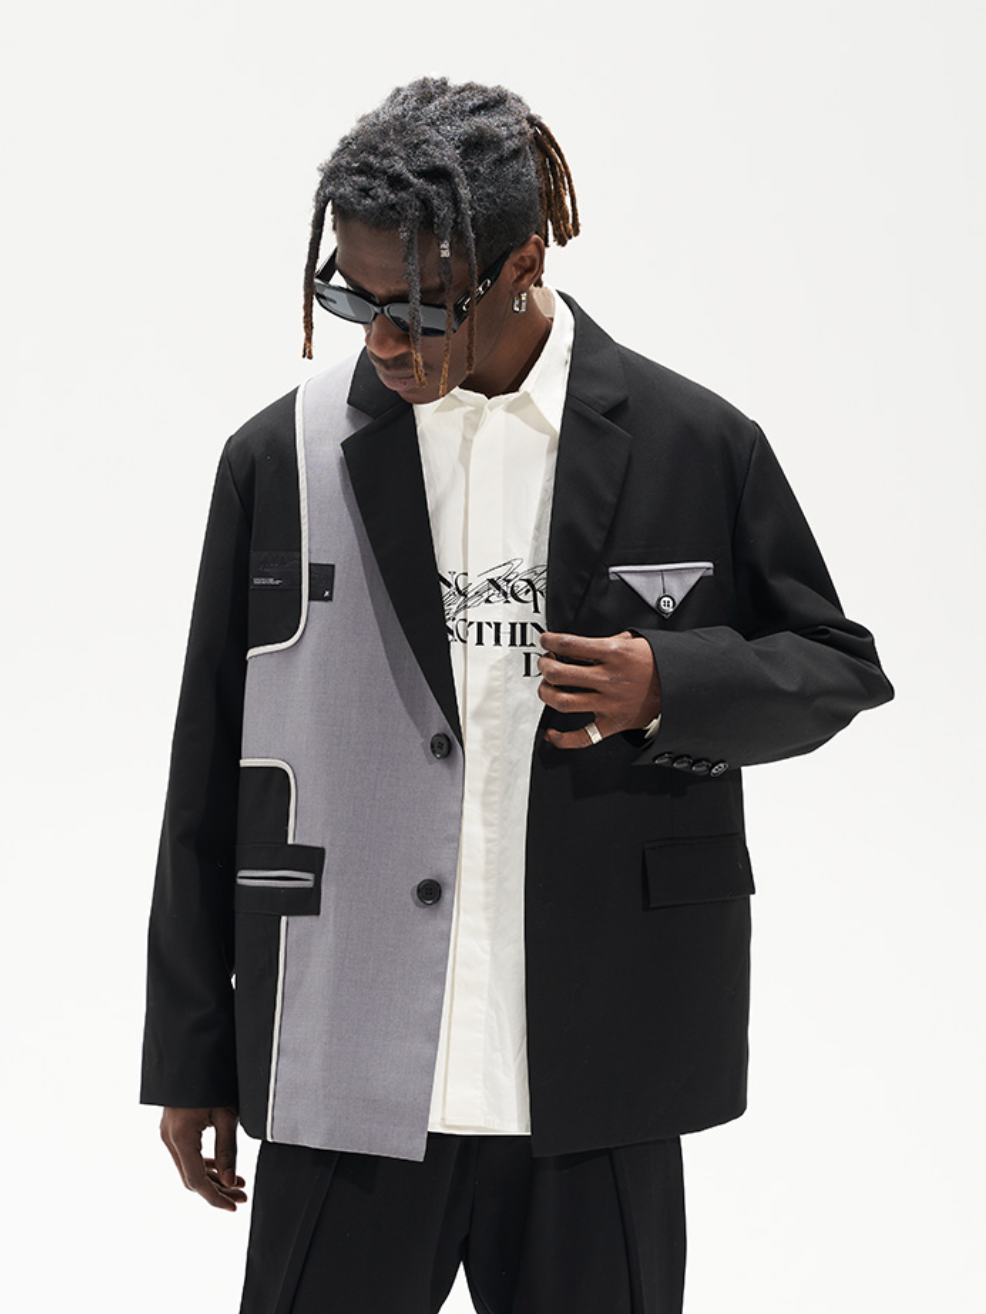 Harsh and Cruel Deconstructed Reversal Stitching Contrast Suit Jacket